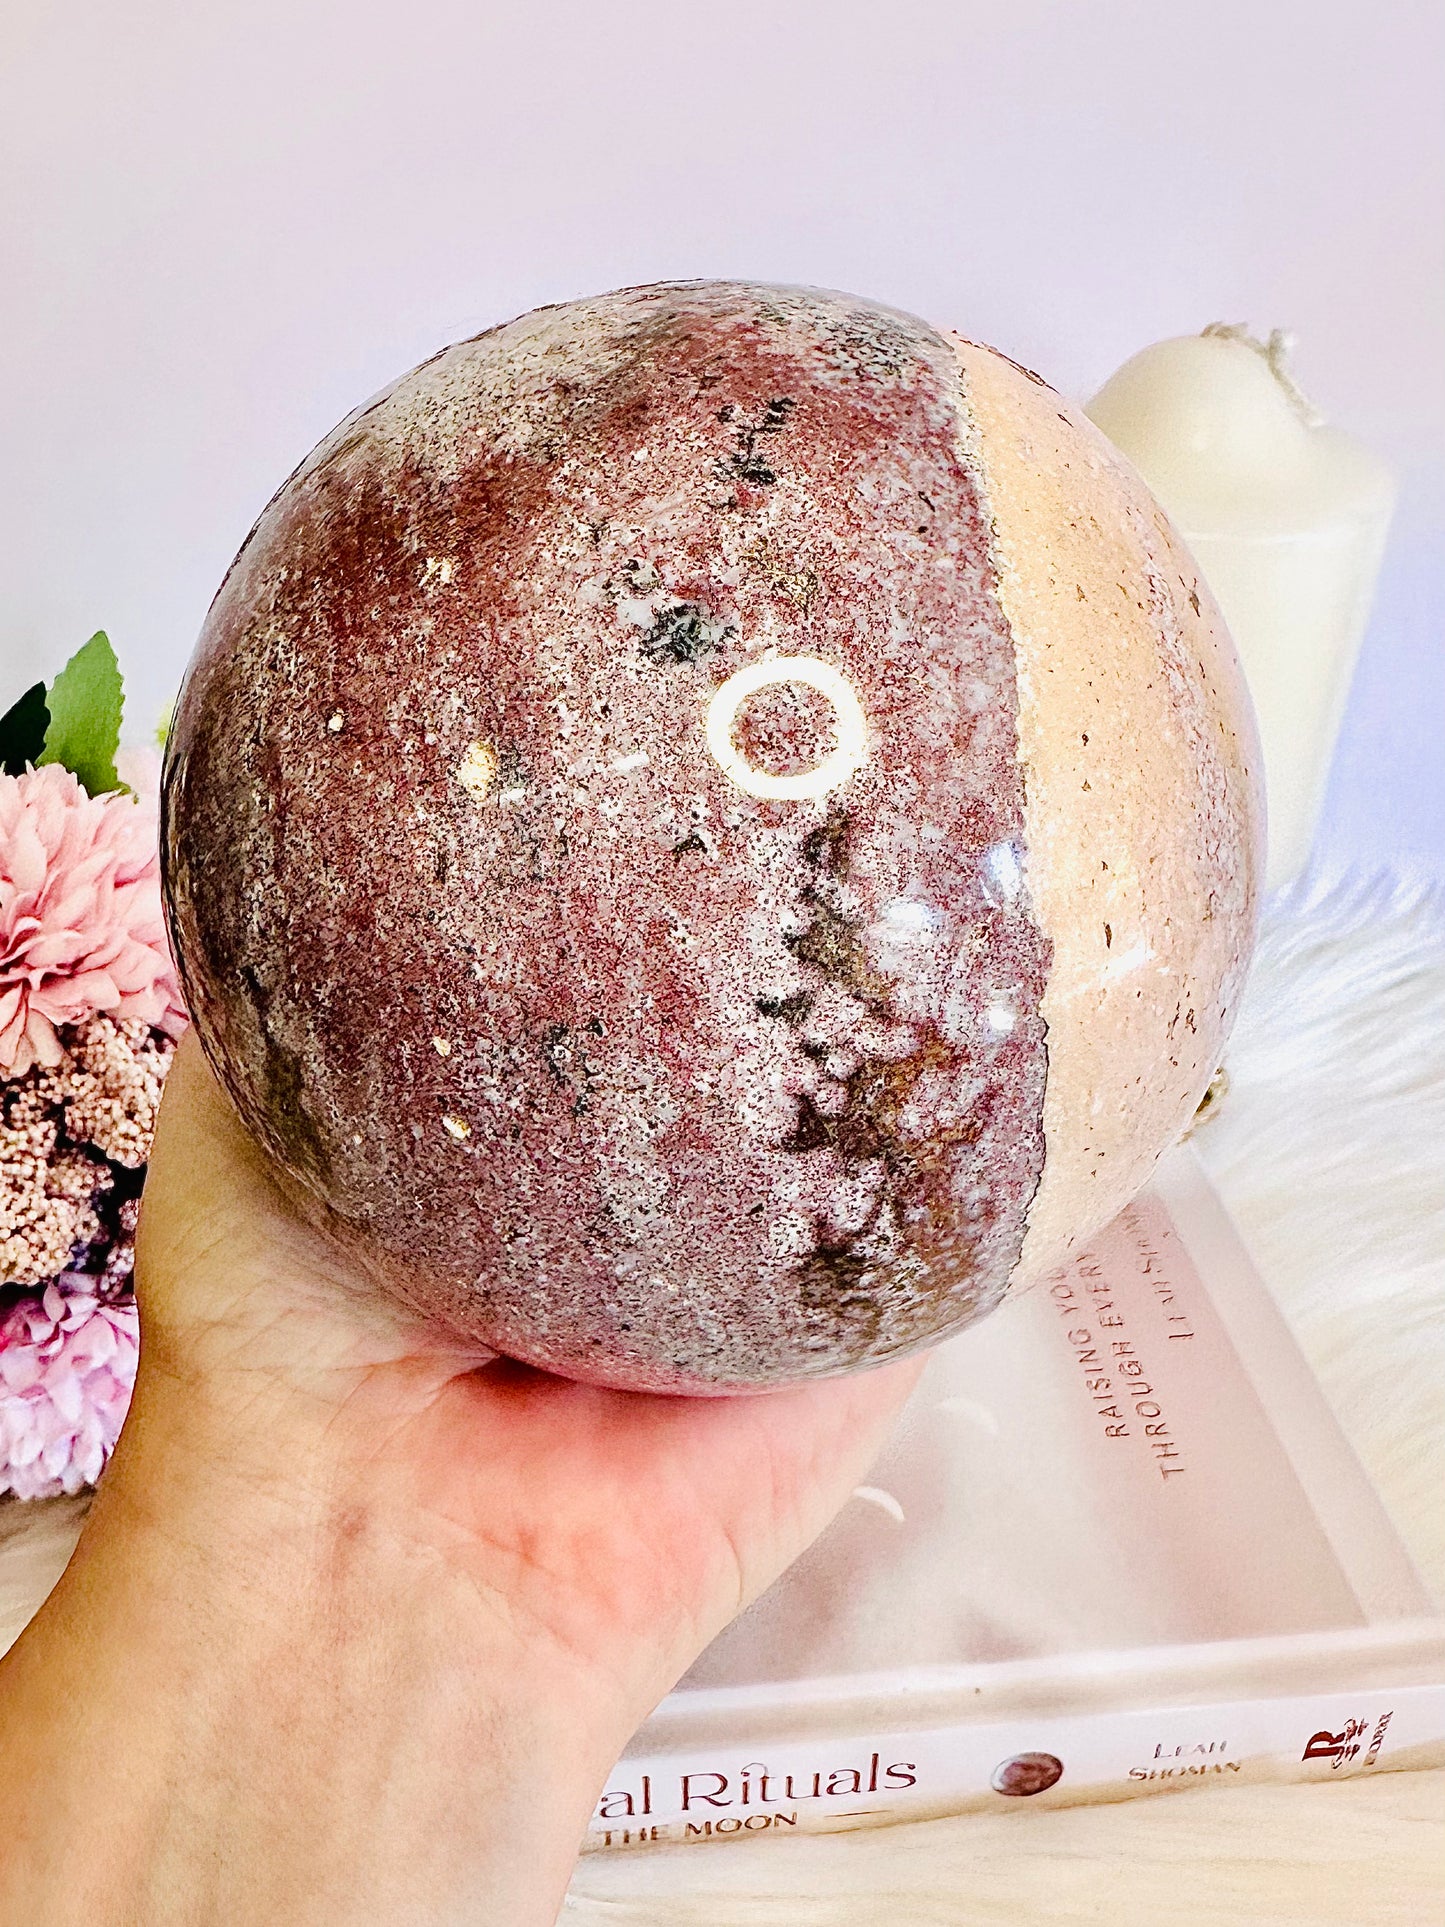 My Favourite!!! Absolutely Fabulous Large 1.67KG 11cm Stunning Ocean Jasper Sphere On Stand